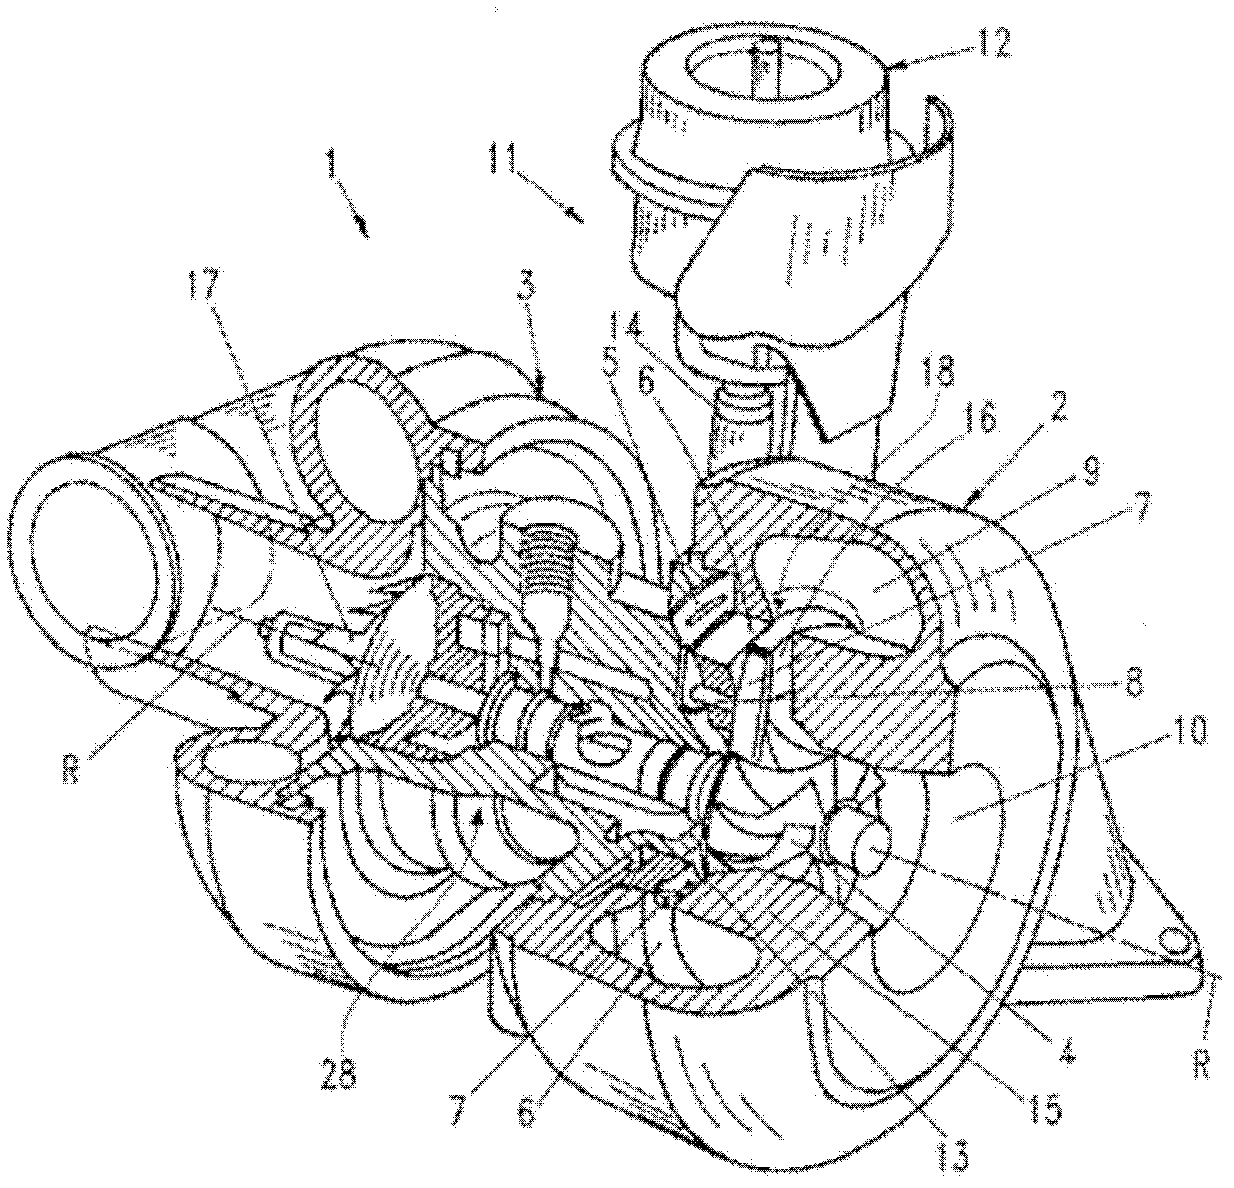 Turbocharger and compressor wheel therefor